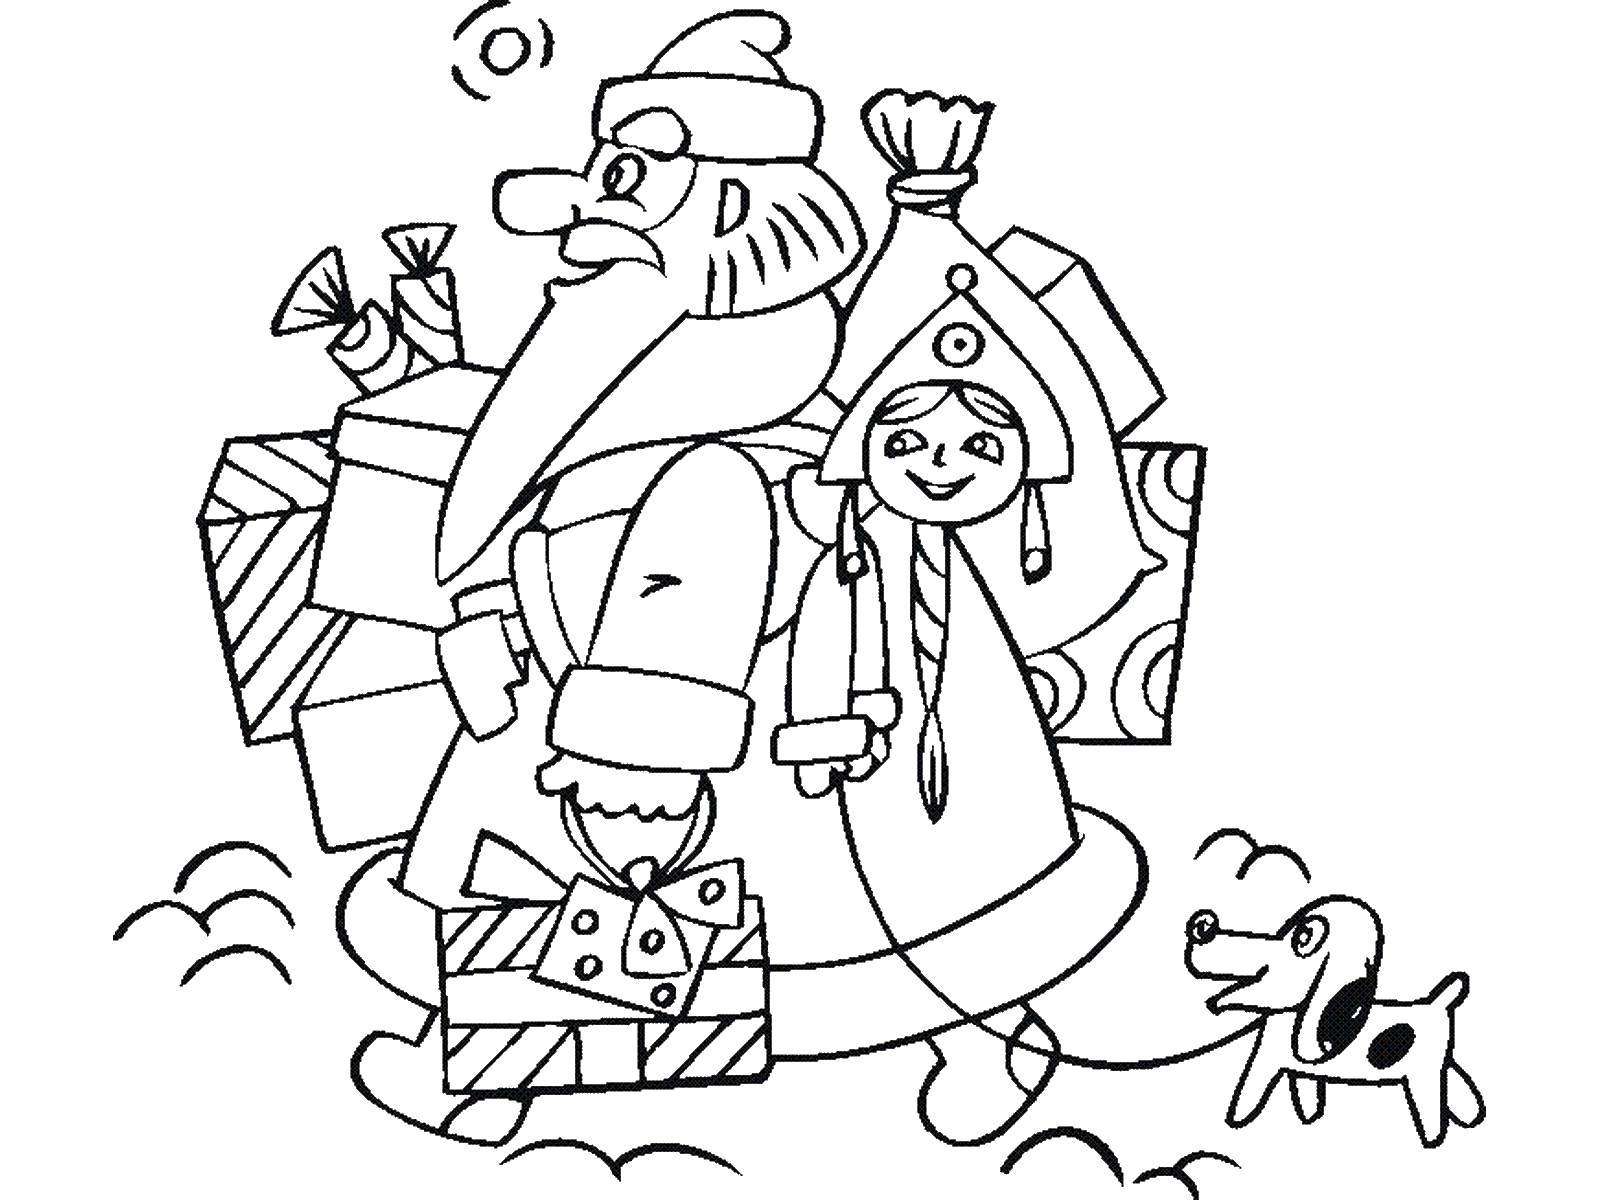 Coloring Grandfather frost and snow maiden. Category new year. Tags:  New Year, Santa Claus, gifts, snow maiden.